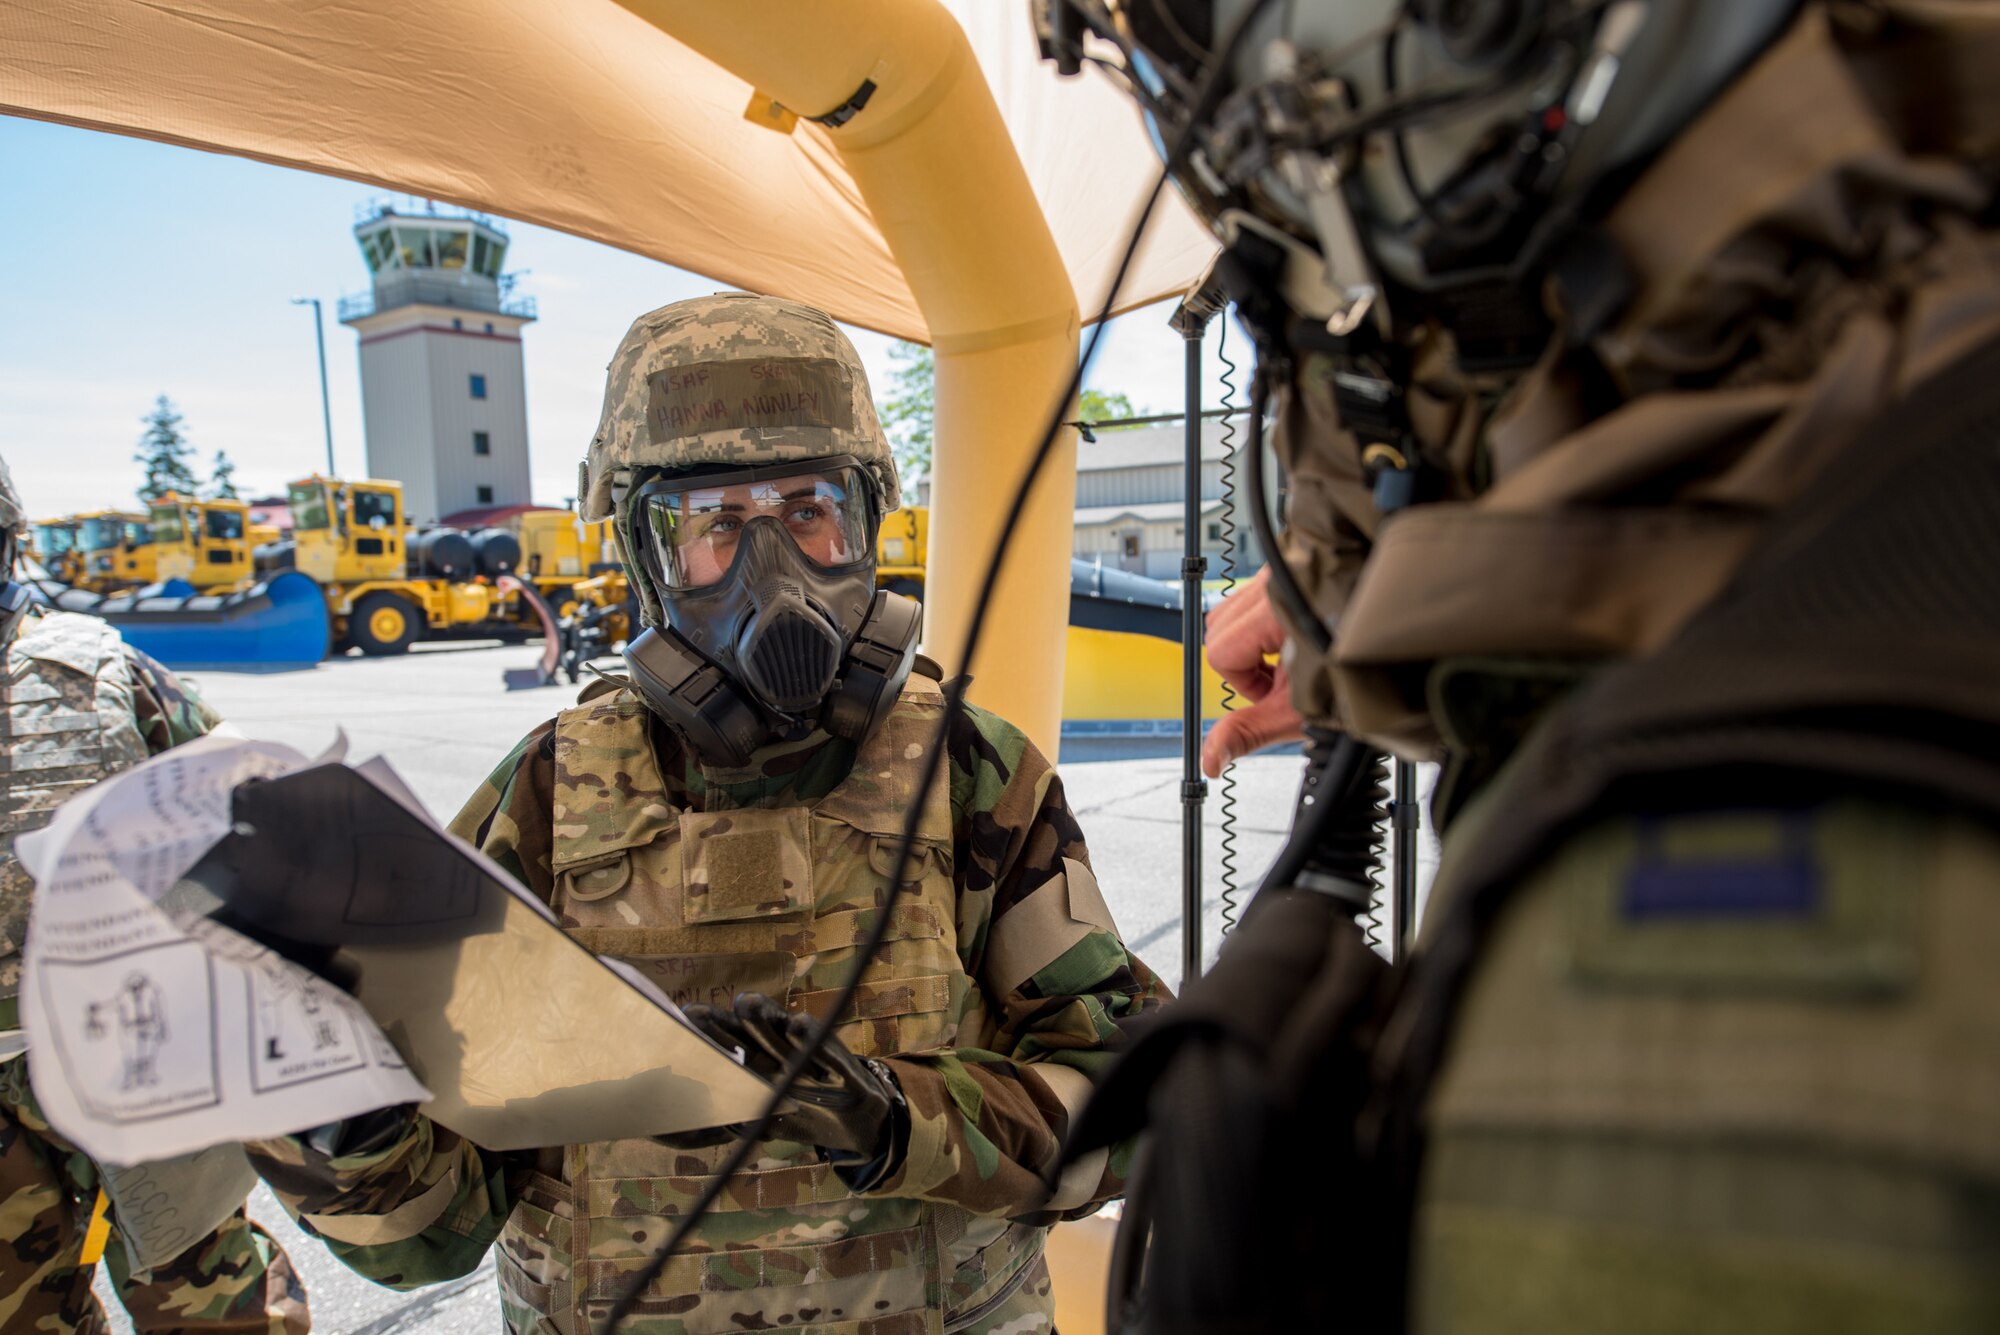 Hannah Nunley (left), flight equipment specialist for the Kentucky Air National Guard’s 123rd Airlift Wing, assists an aircrew member at a chemical contamination control point during an exercise at the Alpena Combat Readiness Training Center in Alpena, Mich., on June 23, 2019. The exercise, called Charred Barrel, tested the wing’s ability to mobilize, fly to a remote site, and operate in a hostile environment. (U.S. Air National Guard photo by Staff Sgt. Joshua Horton)